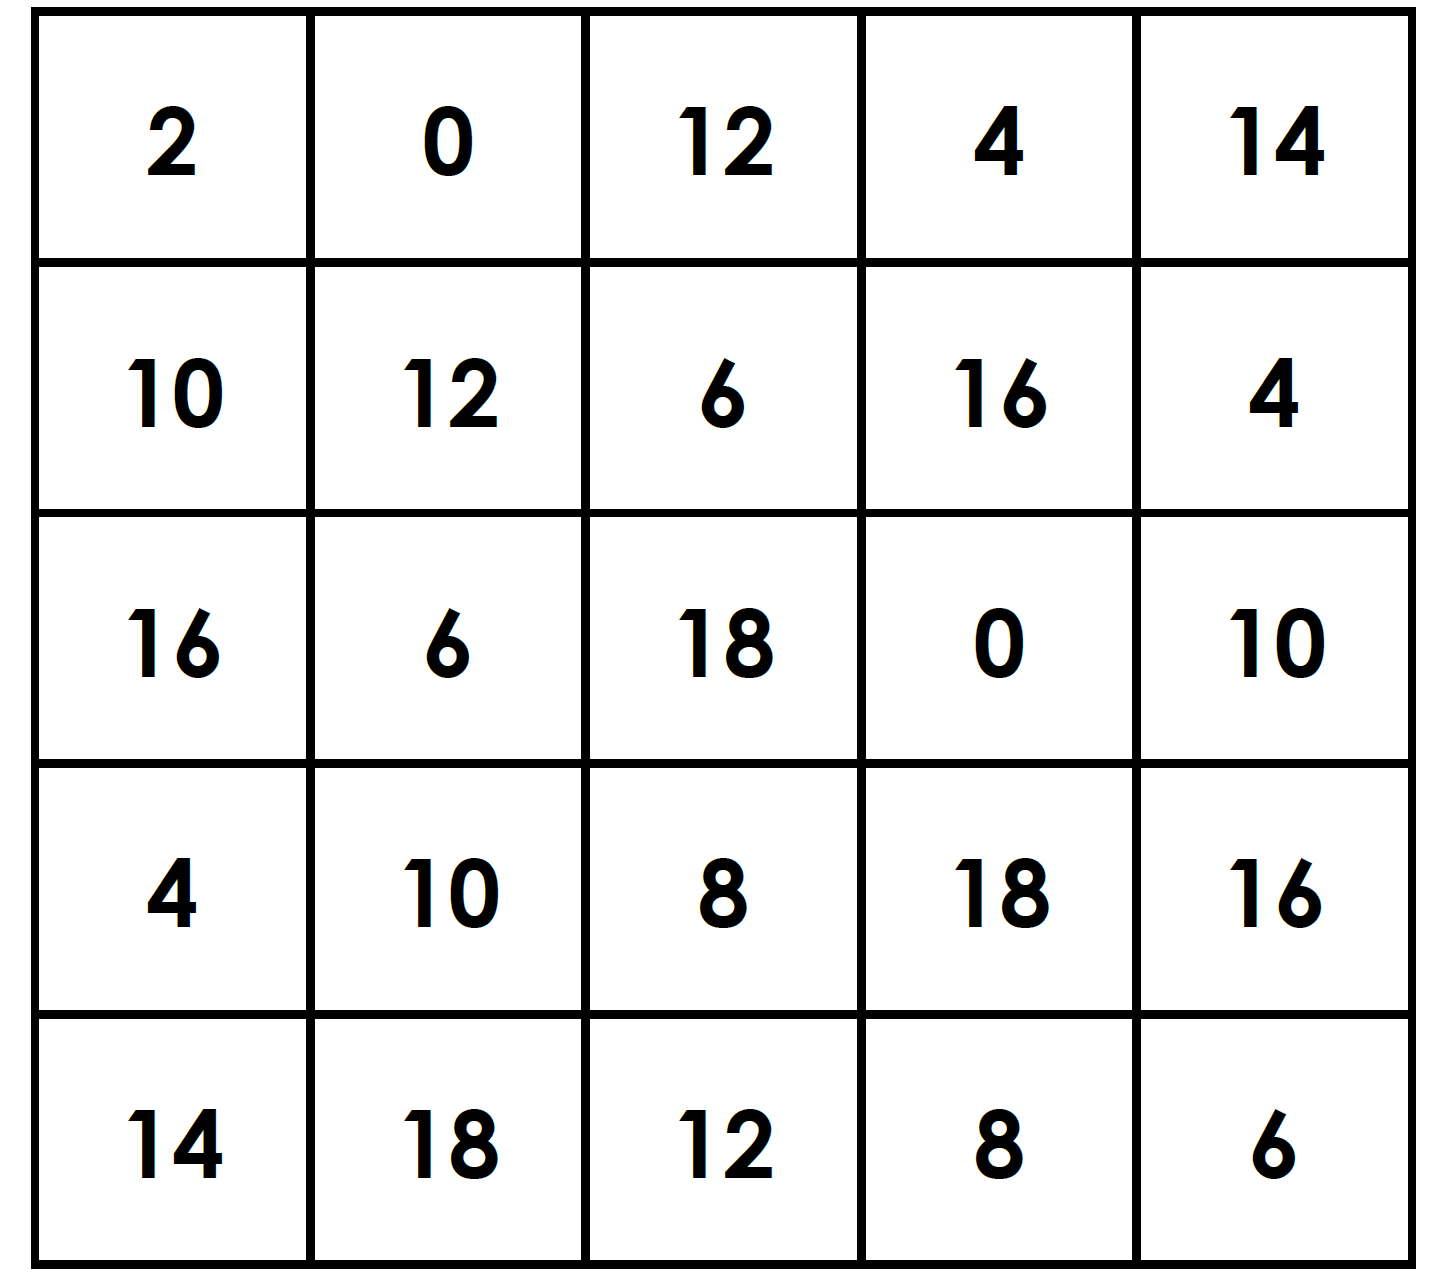 5 by 5 grid with multiples of 2 in each square.